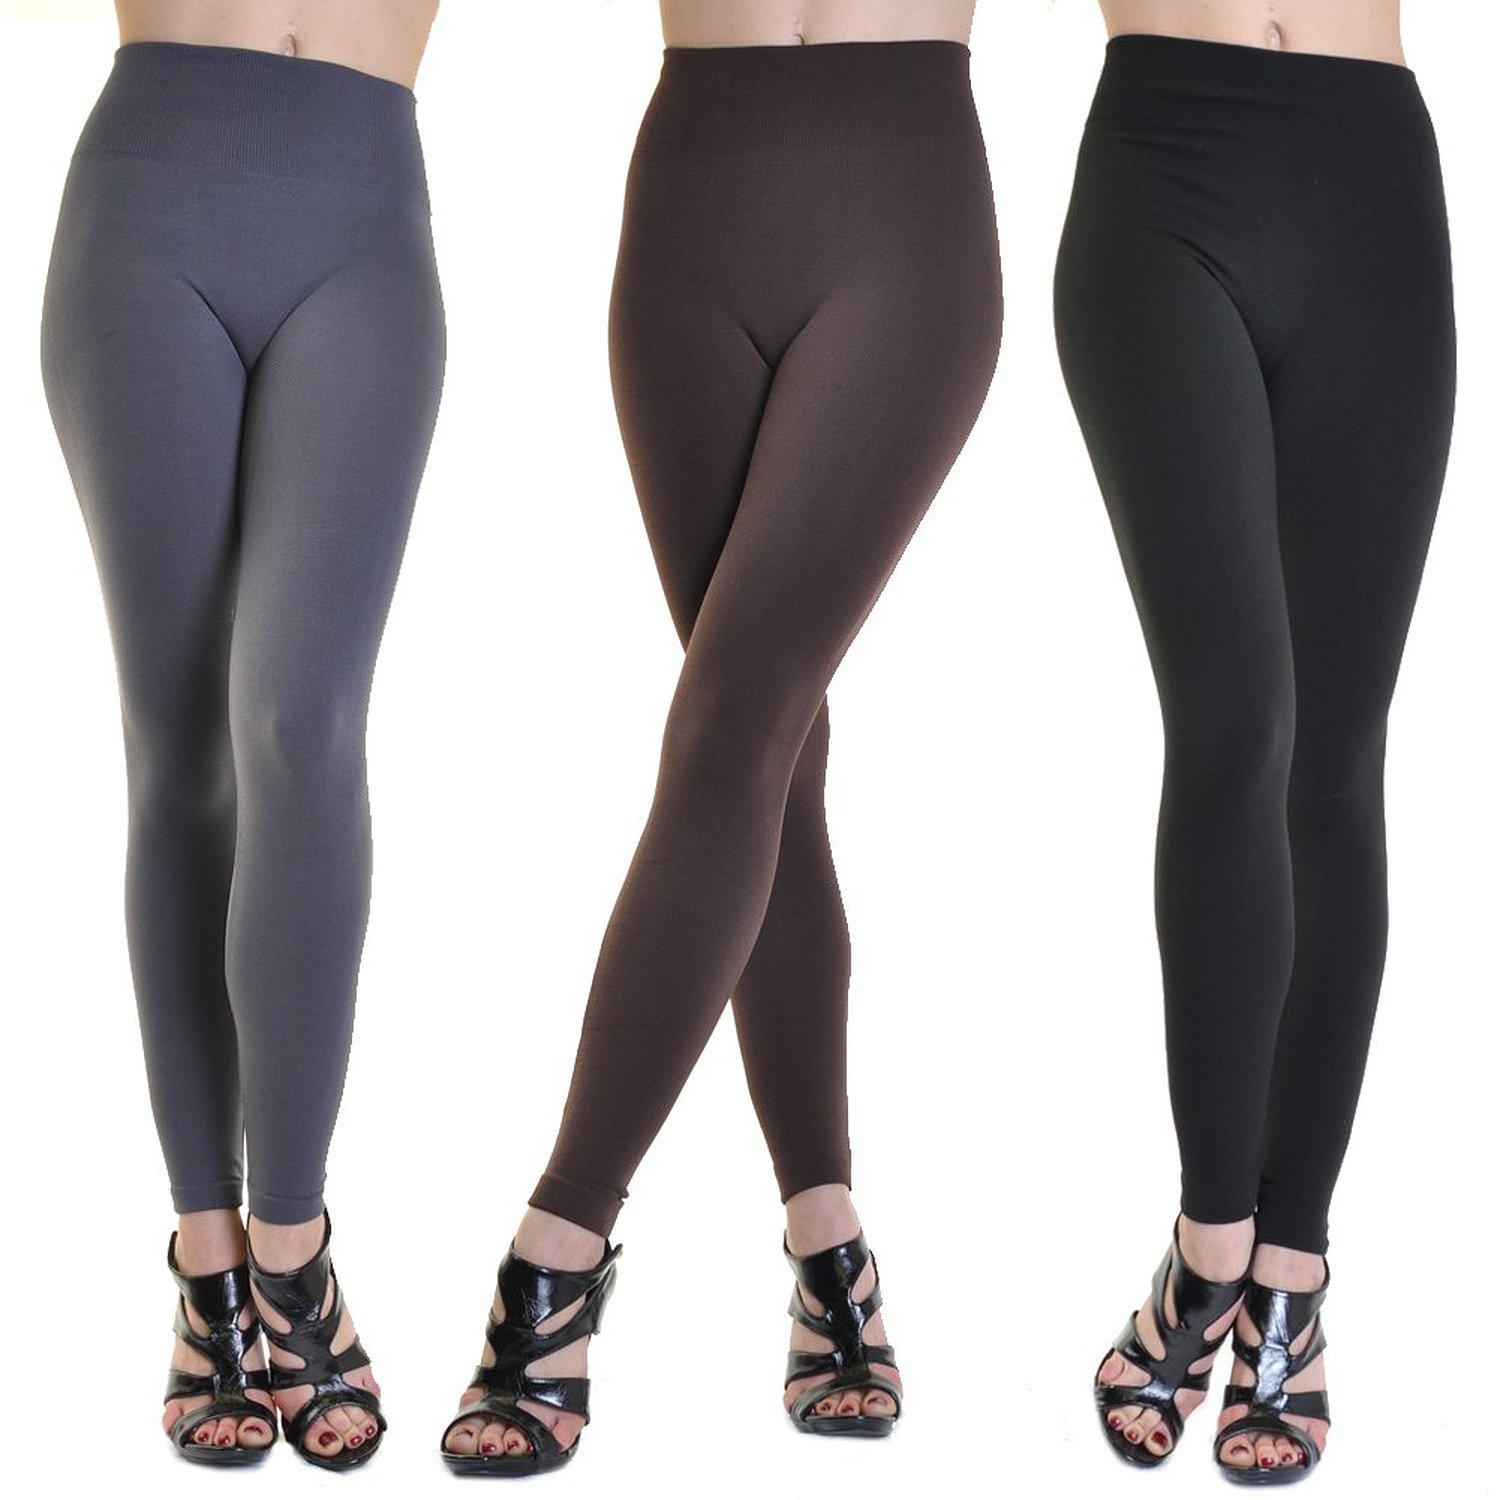 What's the Difference Between Tights, Pantyhose, Stockings, and Leggings? -  What's the Difference?